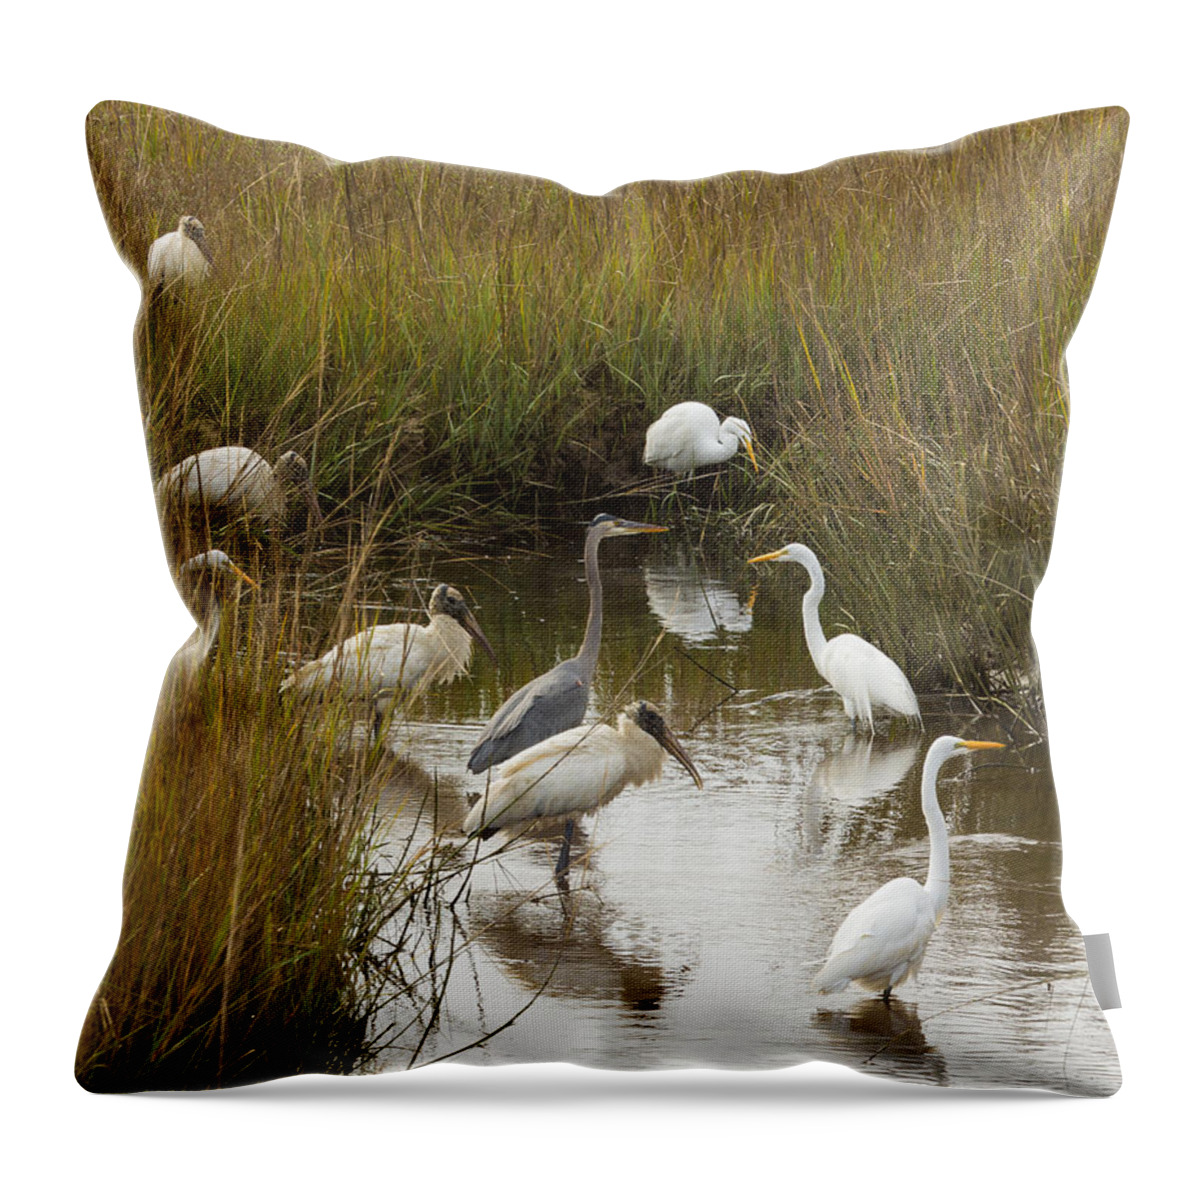 Lowcountry Throw Pillow featuring the photograph Bird Brunch by Patricia Schaefer